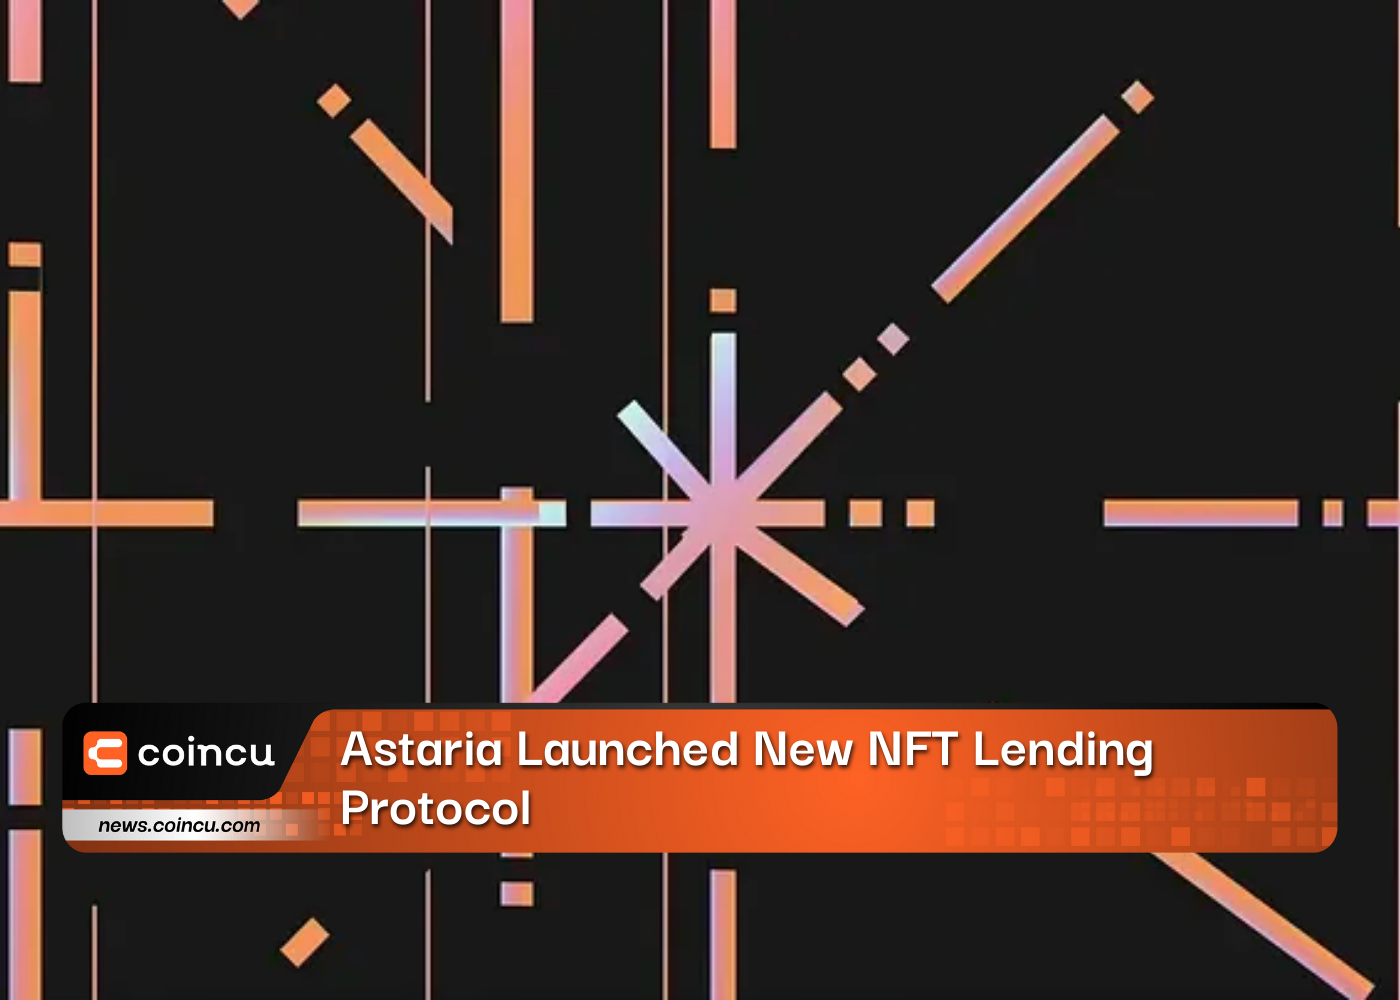 Astaria Launched New NFT Lending Protocol